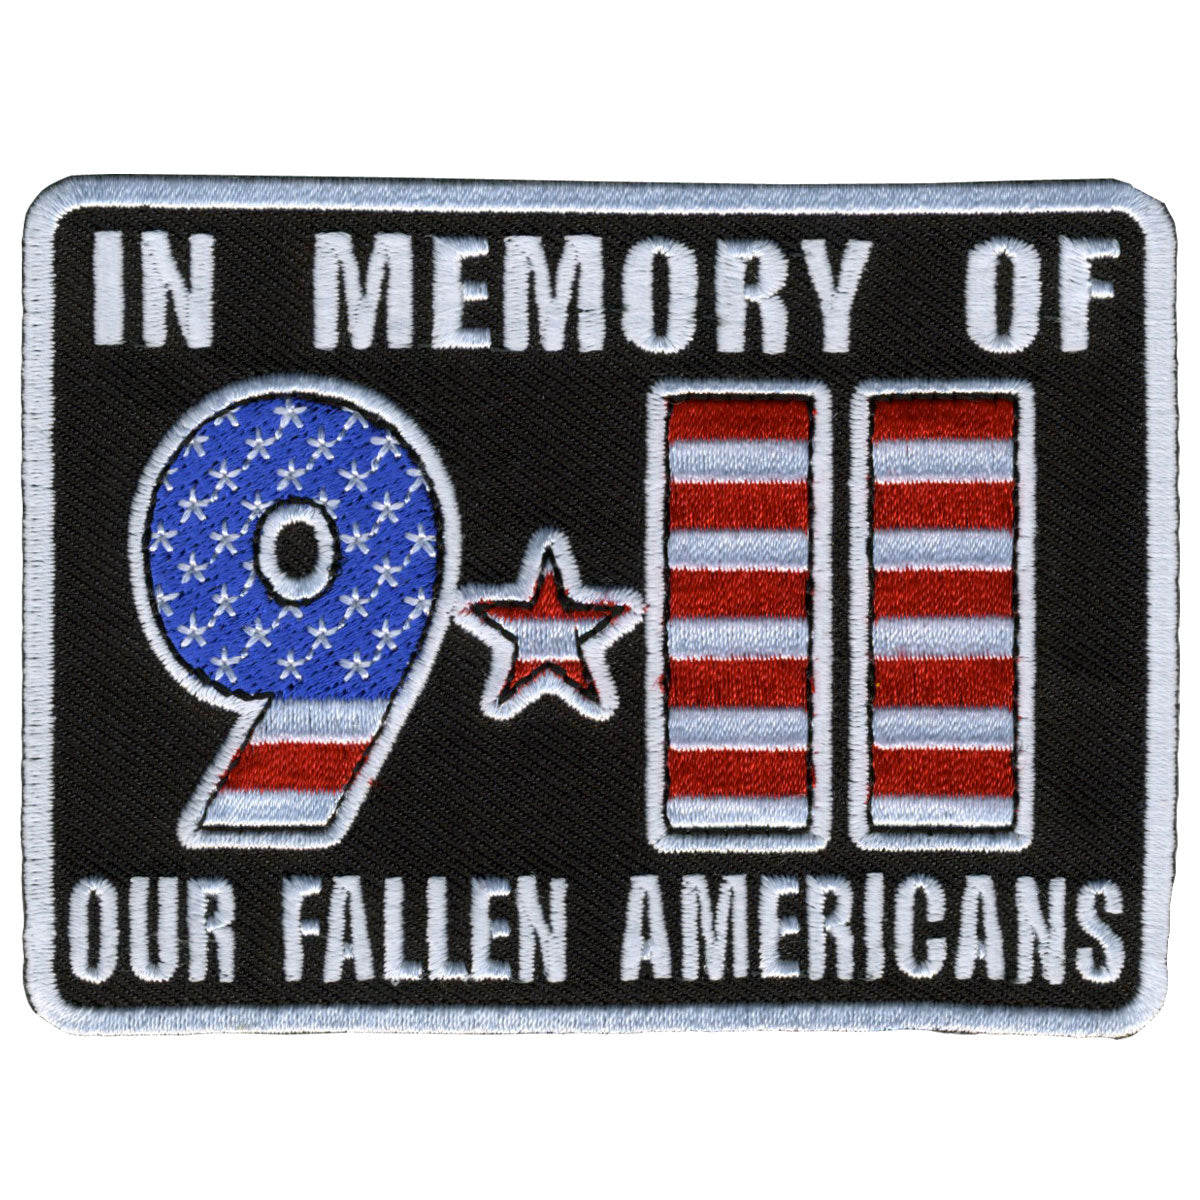 Hot Leathers PPL9314  9-11 In Memory 4" x 3" Patch